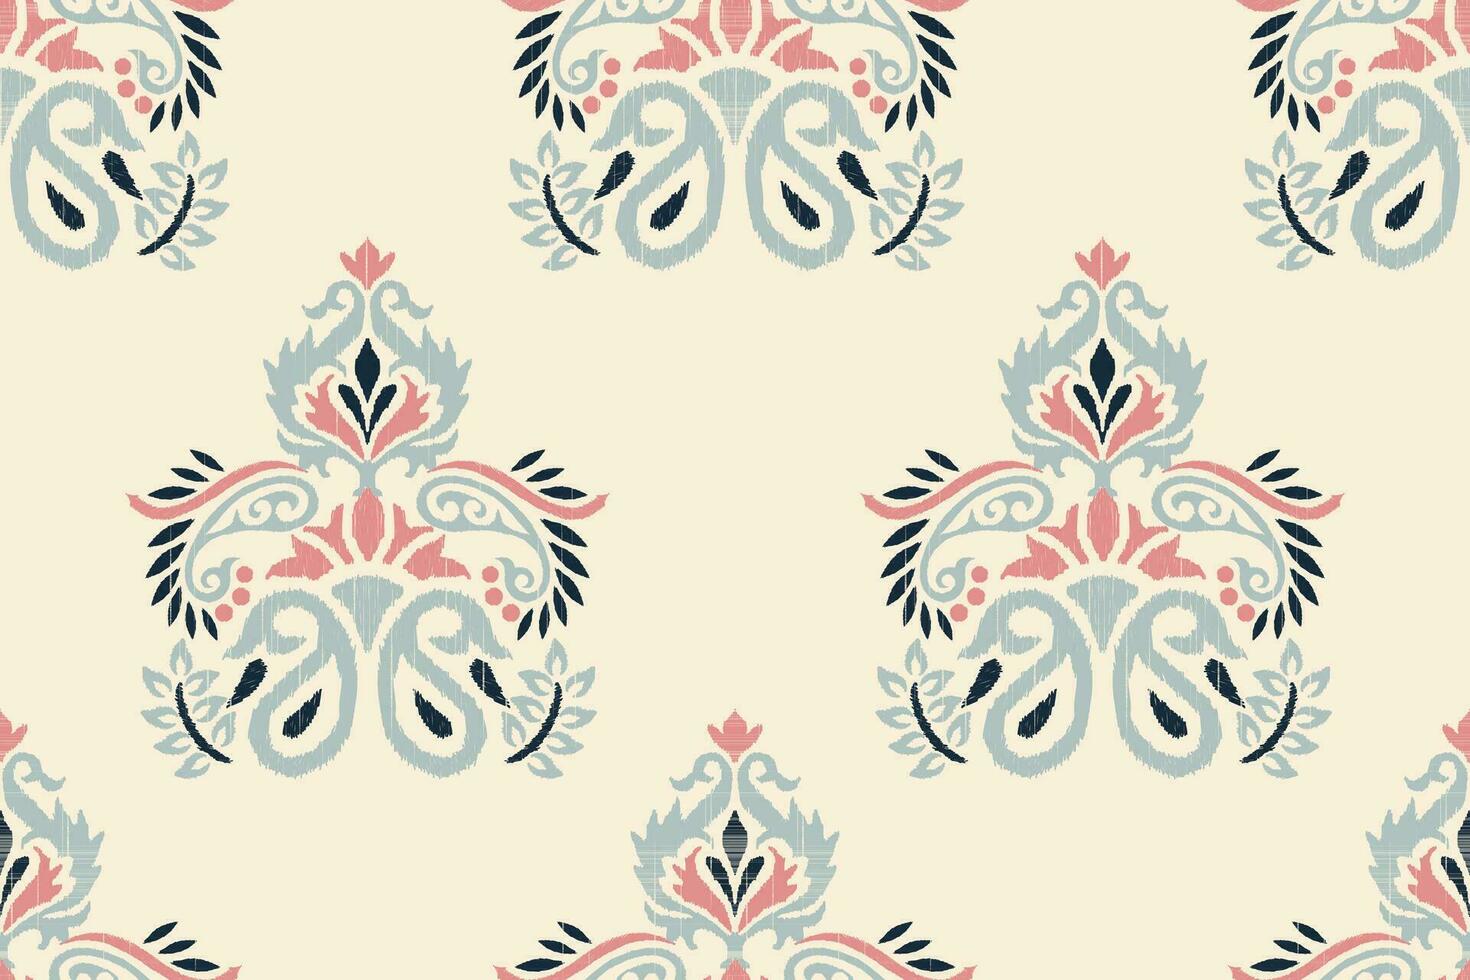 Ikat floral paisley embroidery on white background.Ikat ethnic orienta seamless pattern traditional.Aztec style abstract illustration.design for texture,fabric,clothing,wrapping,decoration,scarf,print vector